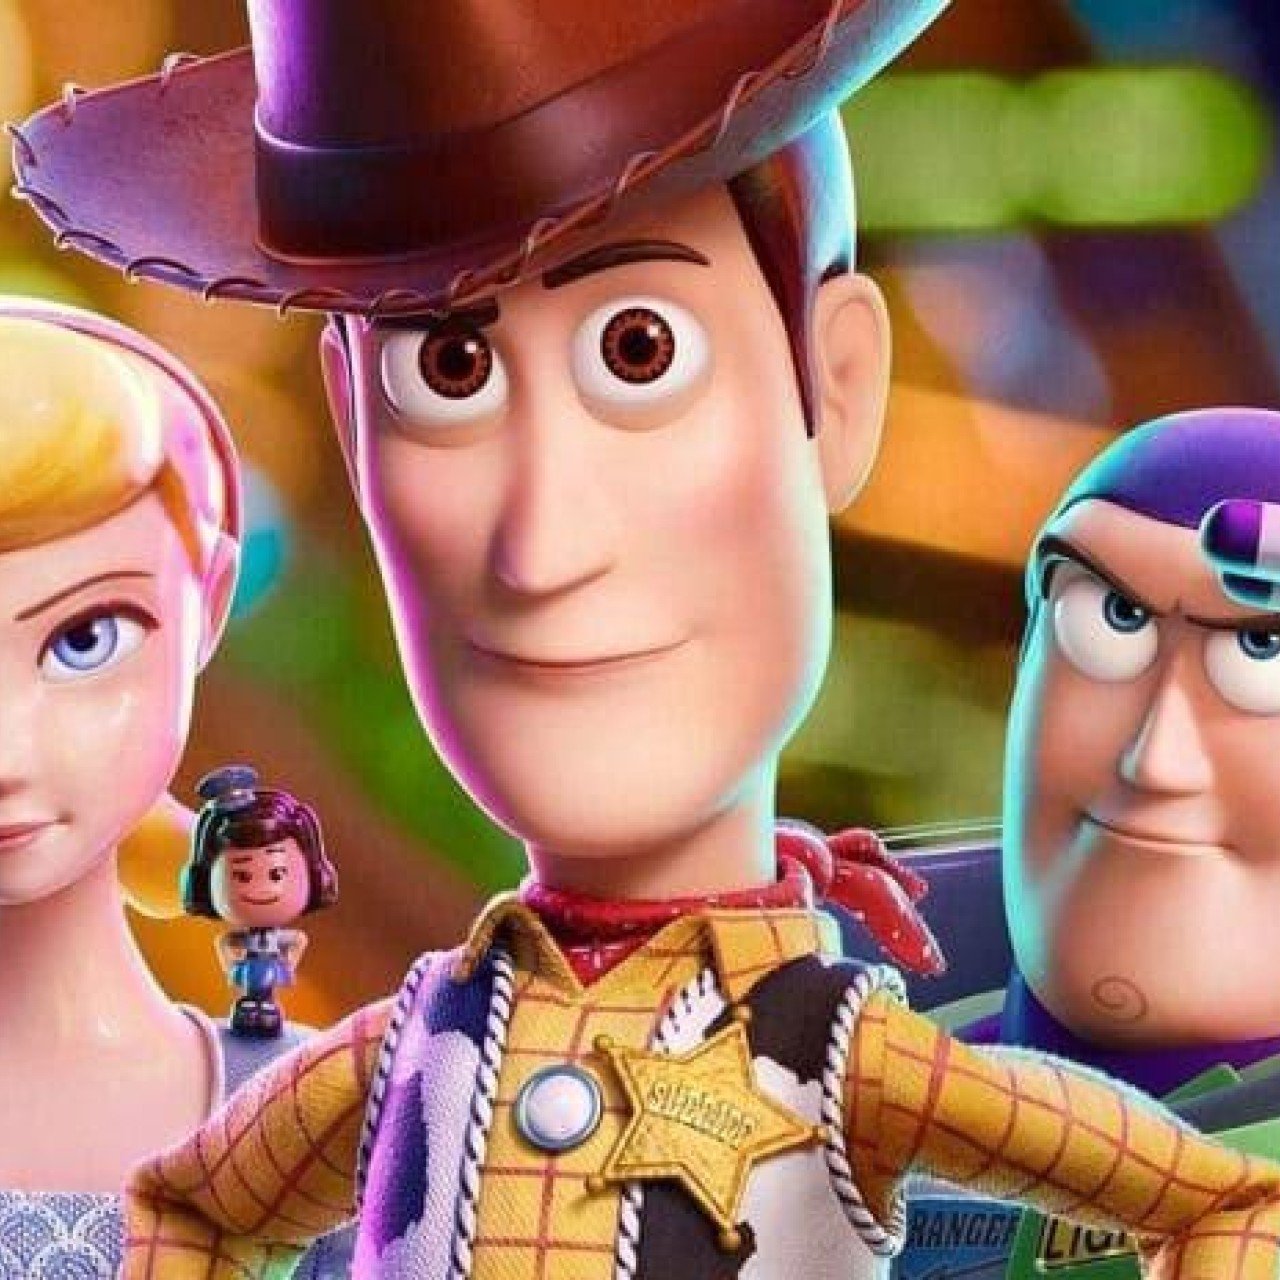 Toy Story 4': The best movie made about a spork